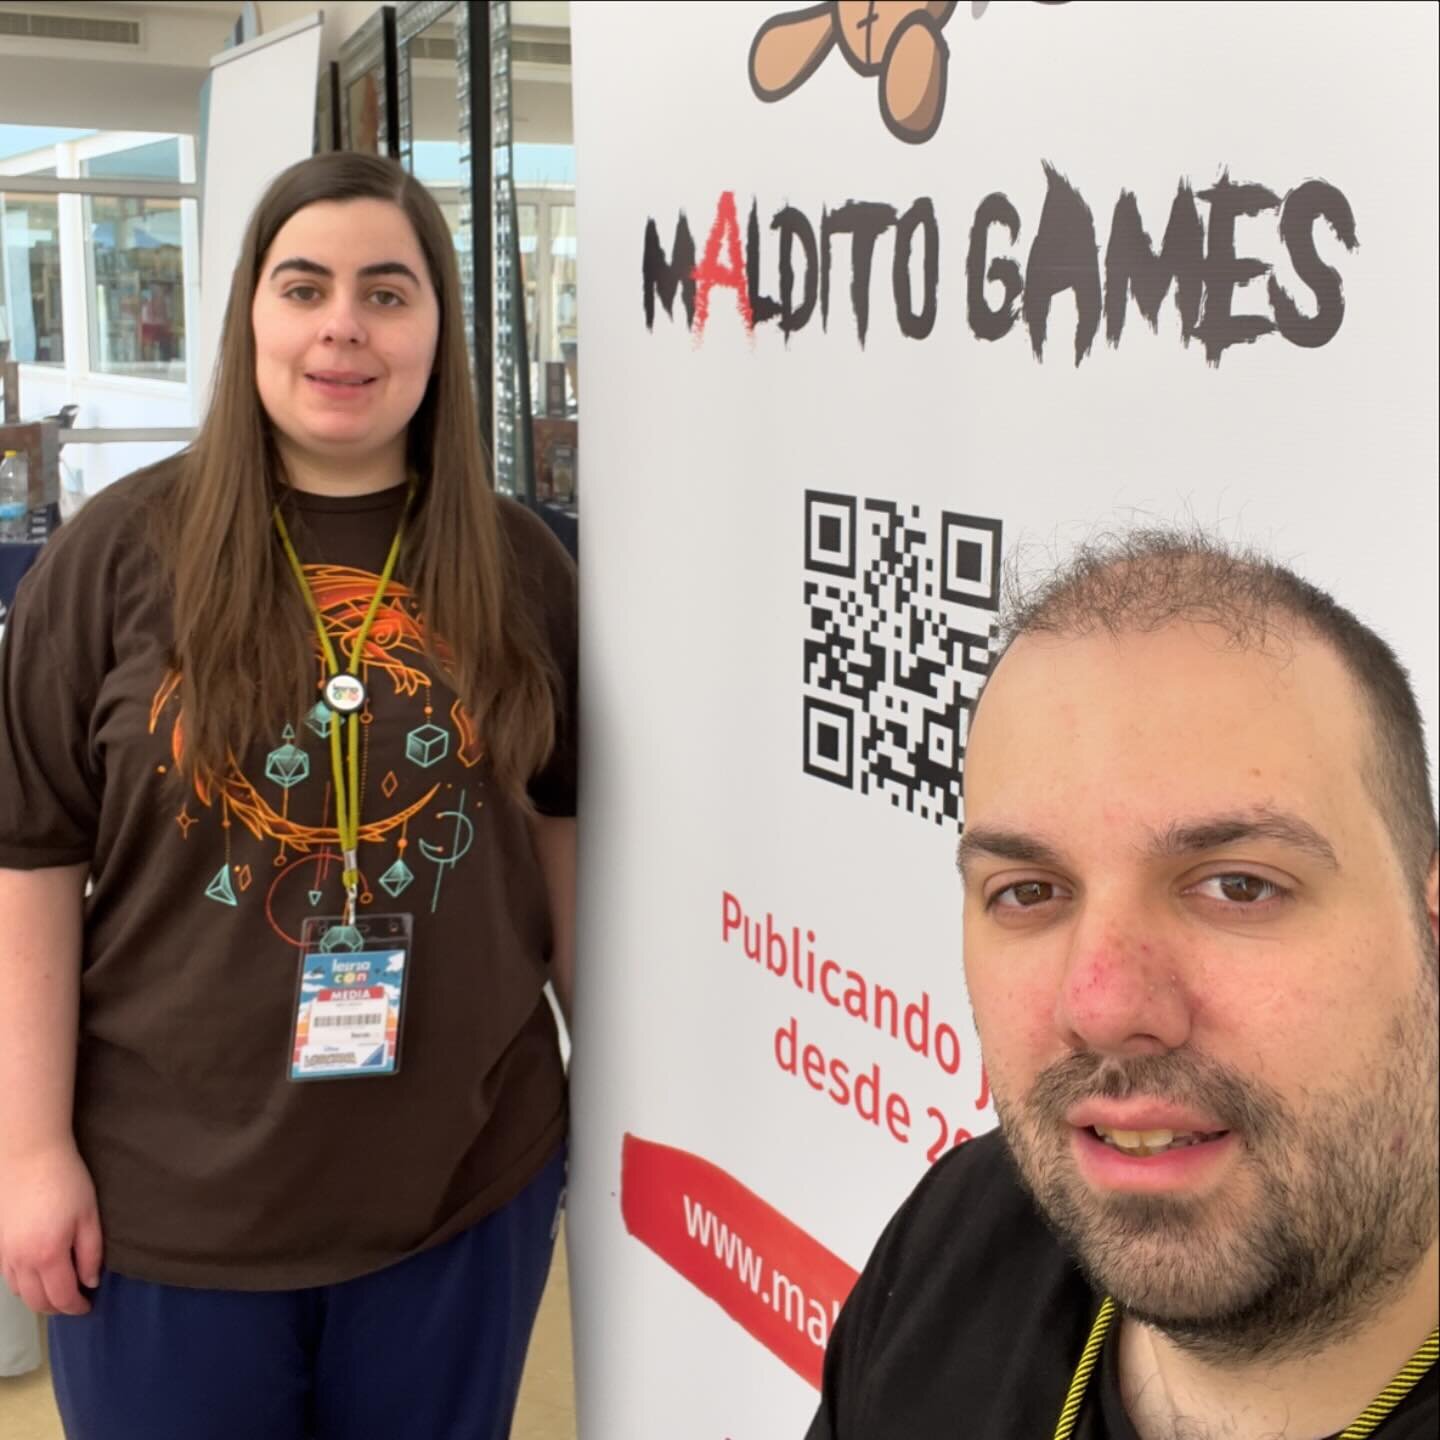 🇵🇹⬇️//🇬🇧 During the last official day we only played Qawale Mini, 3 times in a row. We were also explaining games at the Maldito Games&rsquo; booth (with special focus on Living Forest and Furnace). 🔥 
.
In the morning, we assisted to the press 